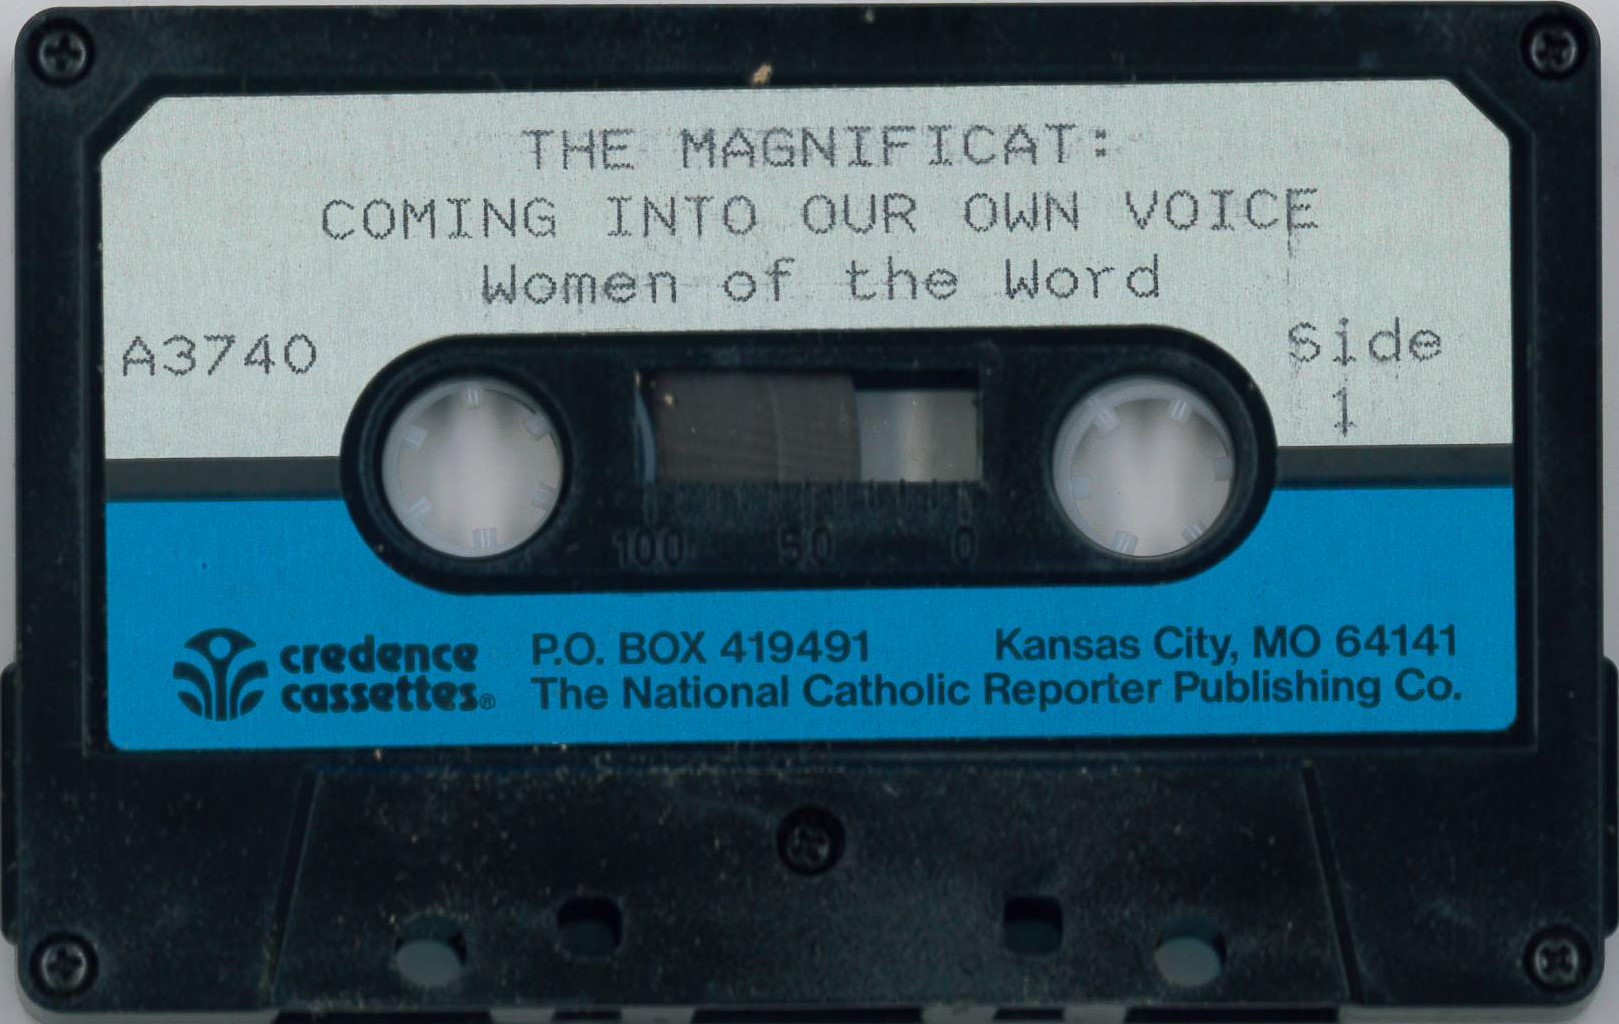 The Magnificat: Coming Into Our Own Voice.